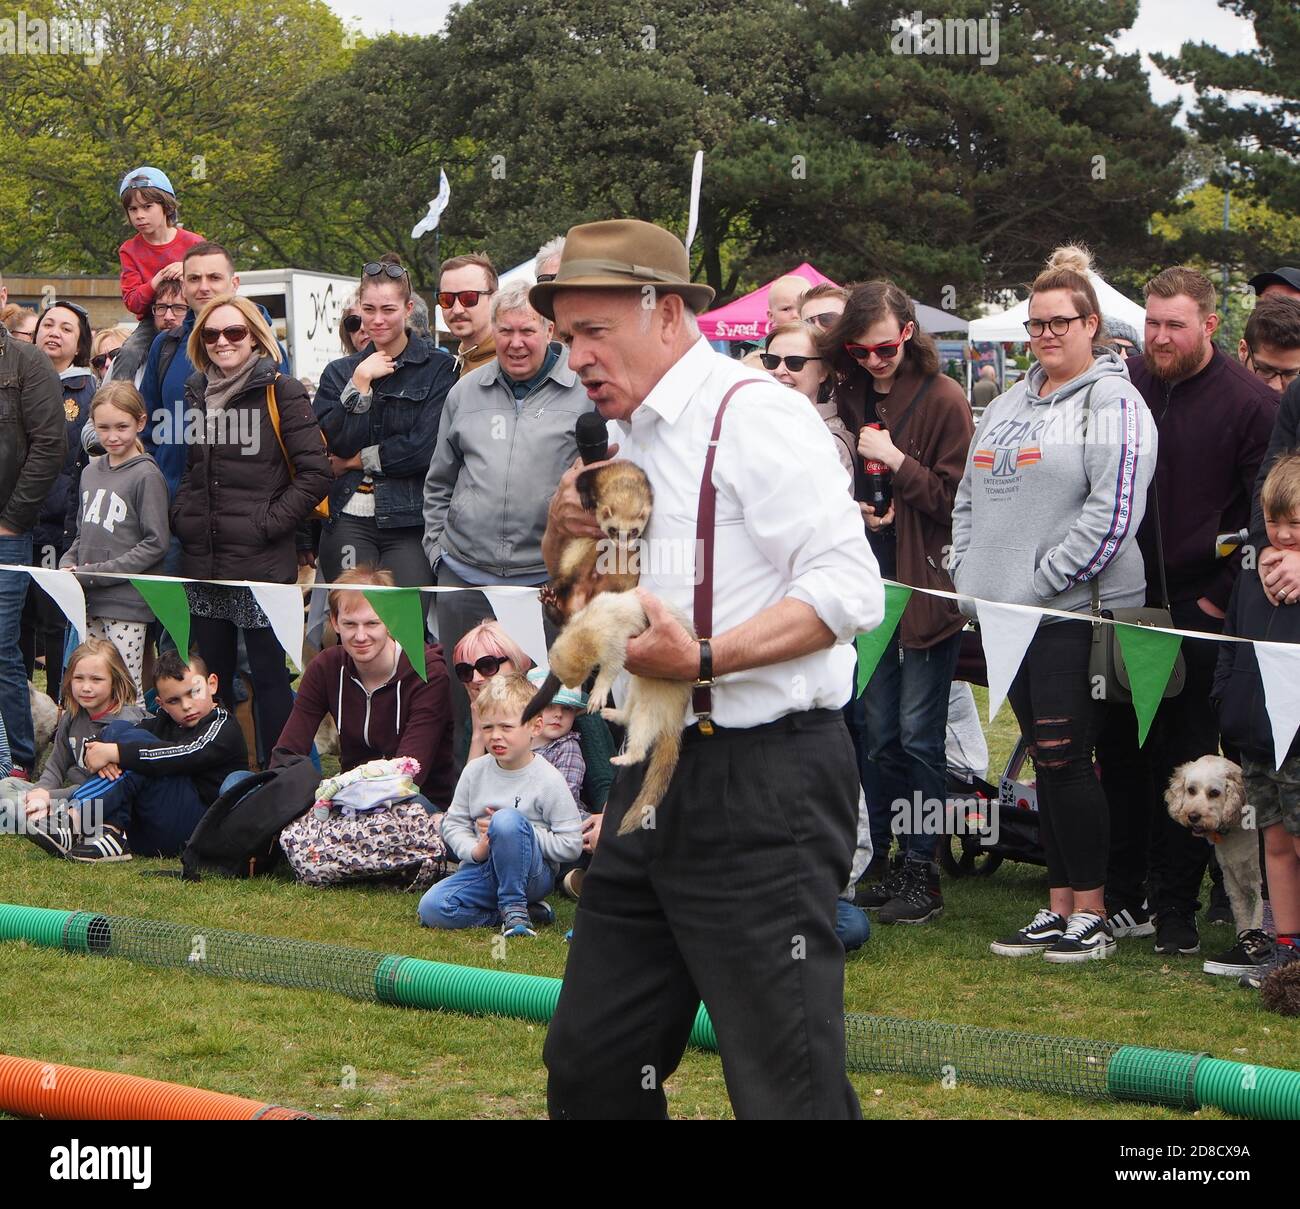 A compere shows off ferrets to the crowd at a ferret racing event. Stock Photo